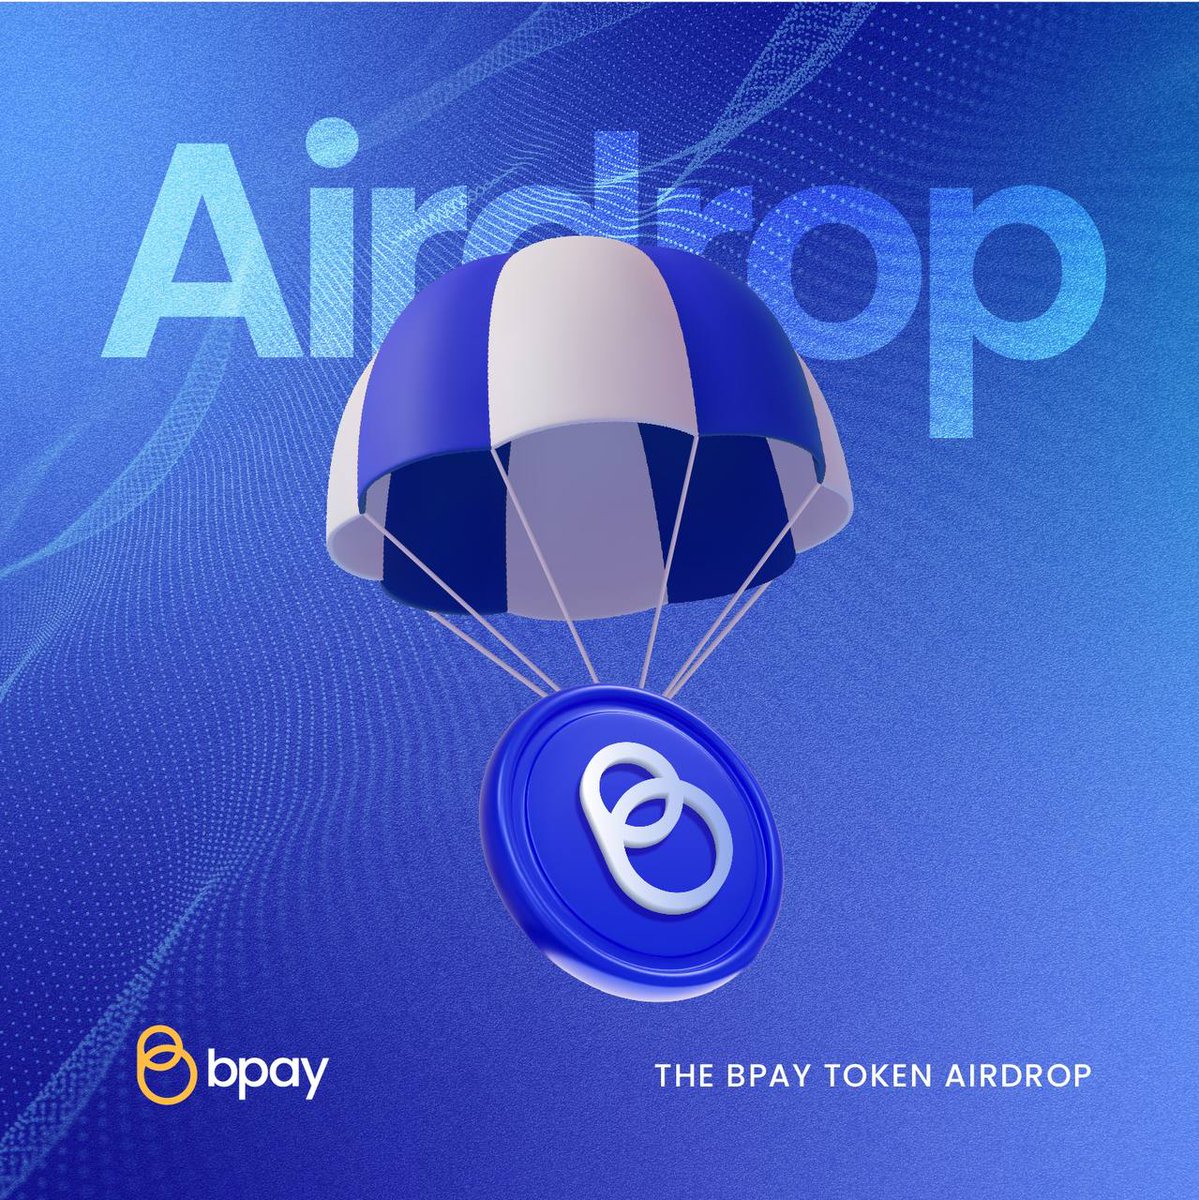 💧 BPAY Airdrop💧

🏆 Task:          ➕  $4 worth of BPAY for 500 random participants each.

👨‍👩‍👧 Referral:   ➕  $1000 worth of BPAY for top 100 referrers.

🔛 Airdrop Link & Information: t.me/AirdropStar/70…

#cryptocurrency #Airdrop #Bitcoin #Boundlesspay #BPAY #Airdropstario